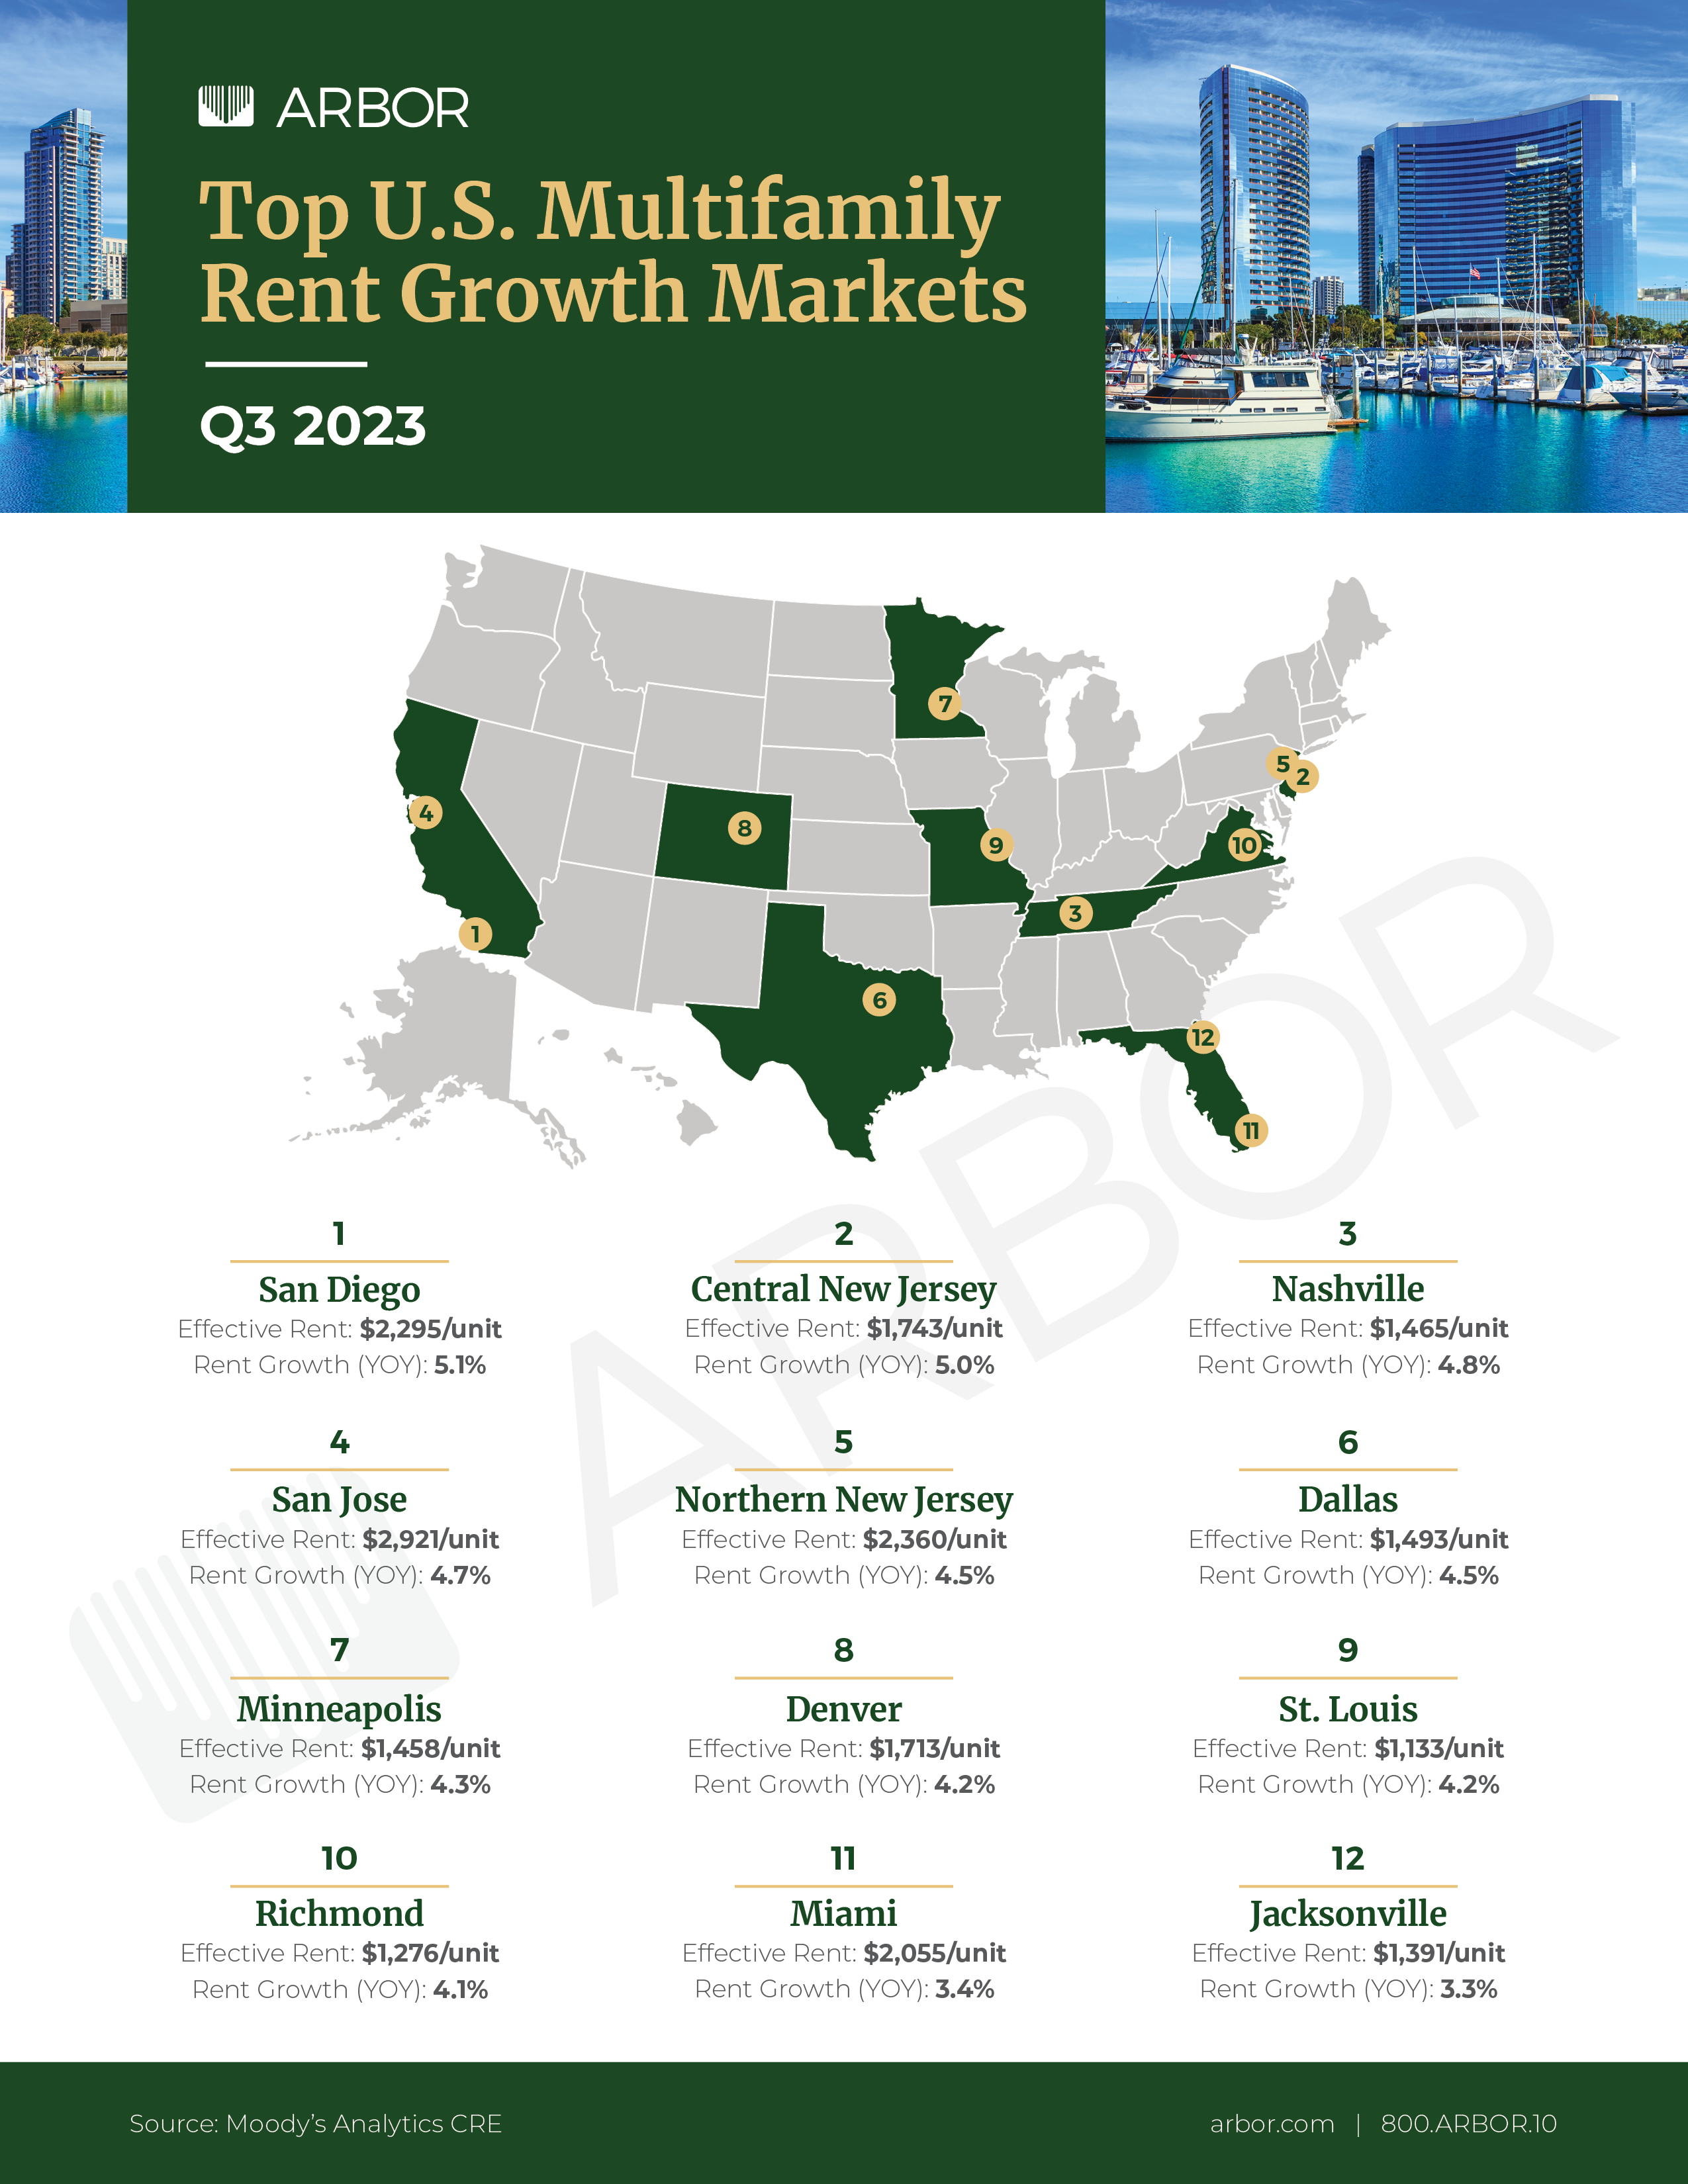 Top U.S. Multifamily Rent Growth Markets — Q3 2023